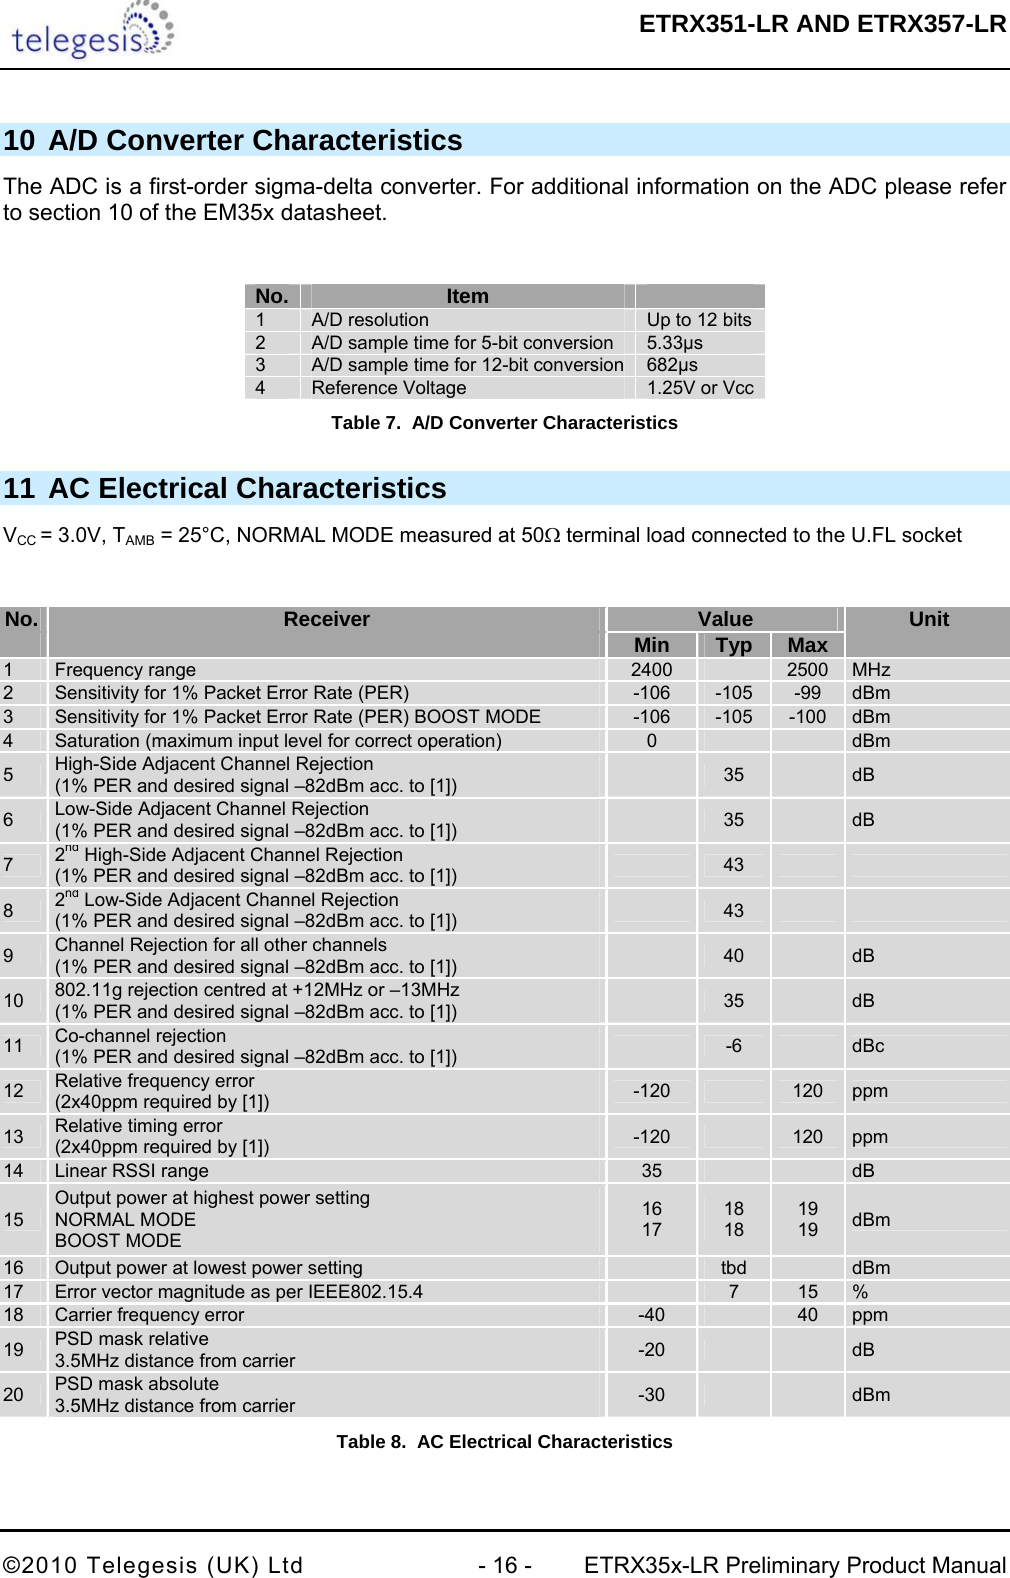  ETRX351-LR AND ETRX357-LR  ©2010 Telegesis (UK) Ltd  - 16 -  ETRX35x-LR Preliminary Product Manual 10 A/D Converter Characteristics The ADC is a first-order sigma-delta converter. For additional information on the ADC please refer to section 10 of the EM35x datasheet.  No.  Item   1  A/D resolution  Up to 12 bits 2  A/D sample time for 5-bit conversion  5.33µs  3  A/D sample time for 12-bit conversion  682µs 4  Reference Voltage  1.25V or Vcc Table 7.  A/D Converter Characteristics 11 AC Electrical Characteristics VCC = 3.0V, TAMB = 25°C, NORMAL MODE measured at 50Ω terminal load connected to the U.FL socket   No.  Receiver  Value  Unit     Min  Typ  Max   1  Frequency range  2400   2500  MHz 2  Sensitivity for 1% Packet Error Rate (PER)  -106  -105  -99  dBm 3  Sensitivity for 1% Packet Error Rate (PER) BOOST MODE  -106  -105  -100  dBm 4  Saturation (maximum input level for correct operation)  0      dBm 5  High-Side Adjacent Channel Rejection  (1% PER and desired signal –82dBm acc. to [1])   35   dB 6  Low-Side Adjacent Channel Rejection  (1% PER and desired signal –82dBm acc. to [1])   35   dB 7  2nd High-Side Adjacent Channel Rejection  (1% PER and desired signal –82dBm acc. to [1])   43     8  2nd Low-Side Adjacent Channel Rejection  (1% PER and desired signal –82dBm acc. to [1])   43     9  Channel Rejection for all other channels (1% PER and desired signal –82dBm acc. to [1])   40   dB 10  802.11g rejection centred at +12MHz or –13MHz (1% PER and desired signal –82dBm acc. to [1])   35   dB 11  Co-channel rejection (1% PER and desired signal –82dBm acc. to [1])   -6   dBc 12  Relative frequency error (2x40ppm required by [1])  -120   120  ppm 13  Relative timing error (2x40ppm required by [1])  -120   120  ppm 14  Linear RSSI range  35      dB 15 Output power at highest power setting NORMAL MODE BOOST MODE 16 17 18 18 19 19  dBm 16  Output power at lowest power setting   tbd   dBm 17  Error vector magnitude as per IEEE802.15.4   7  15  % 18  Carrier frequency error  -40   40  ppm 19  PSD mask relative 3.5MHz distance from carrier  -20      dB 20  PSD mask absolute 3.5MHz distance from carrier  -30      dBm Table 8.  AC Electrical Characteristics  